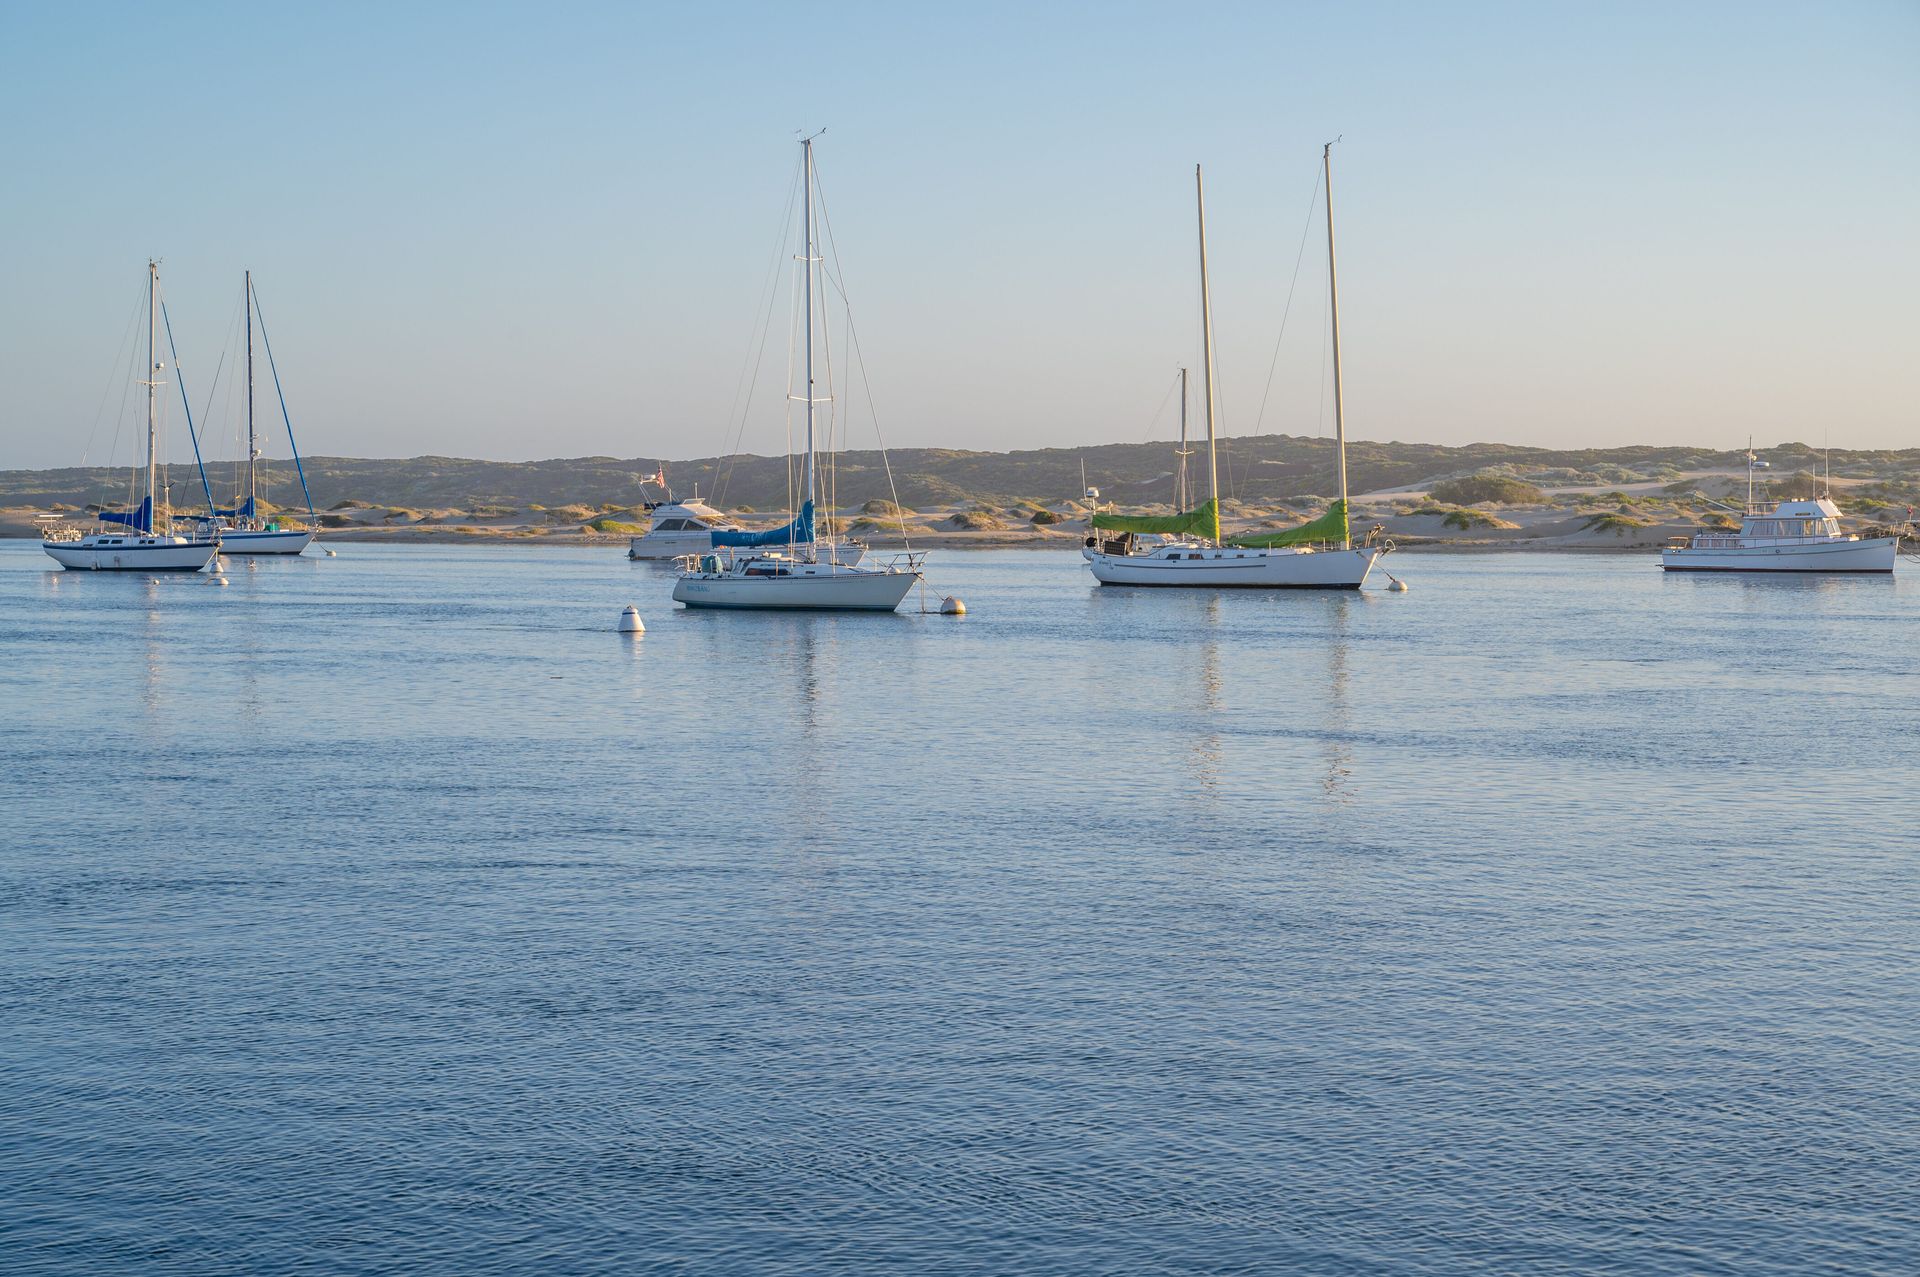 A group of sailboats are floating on top of a body of water.